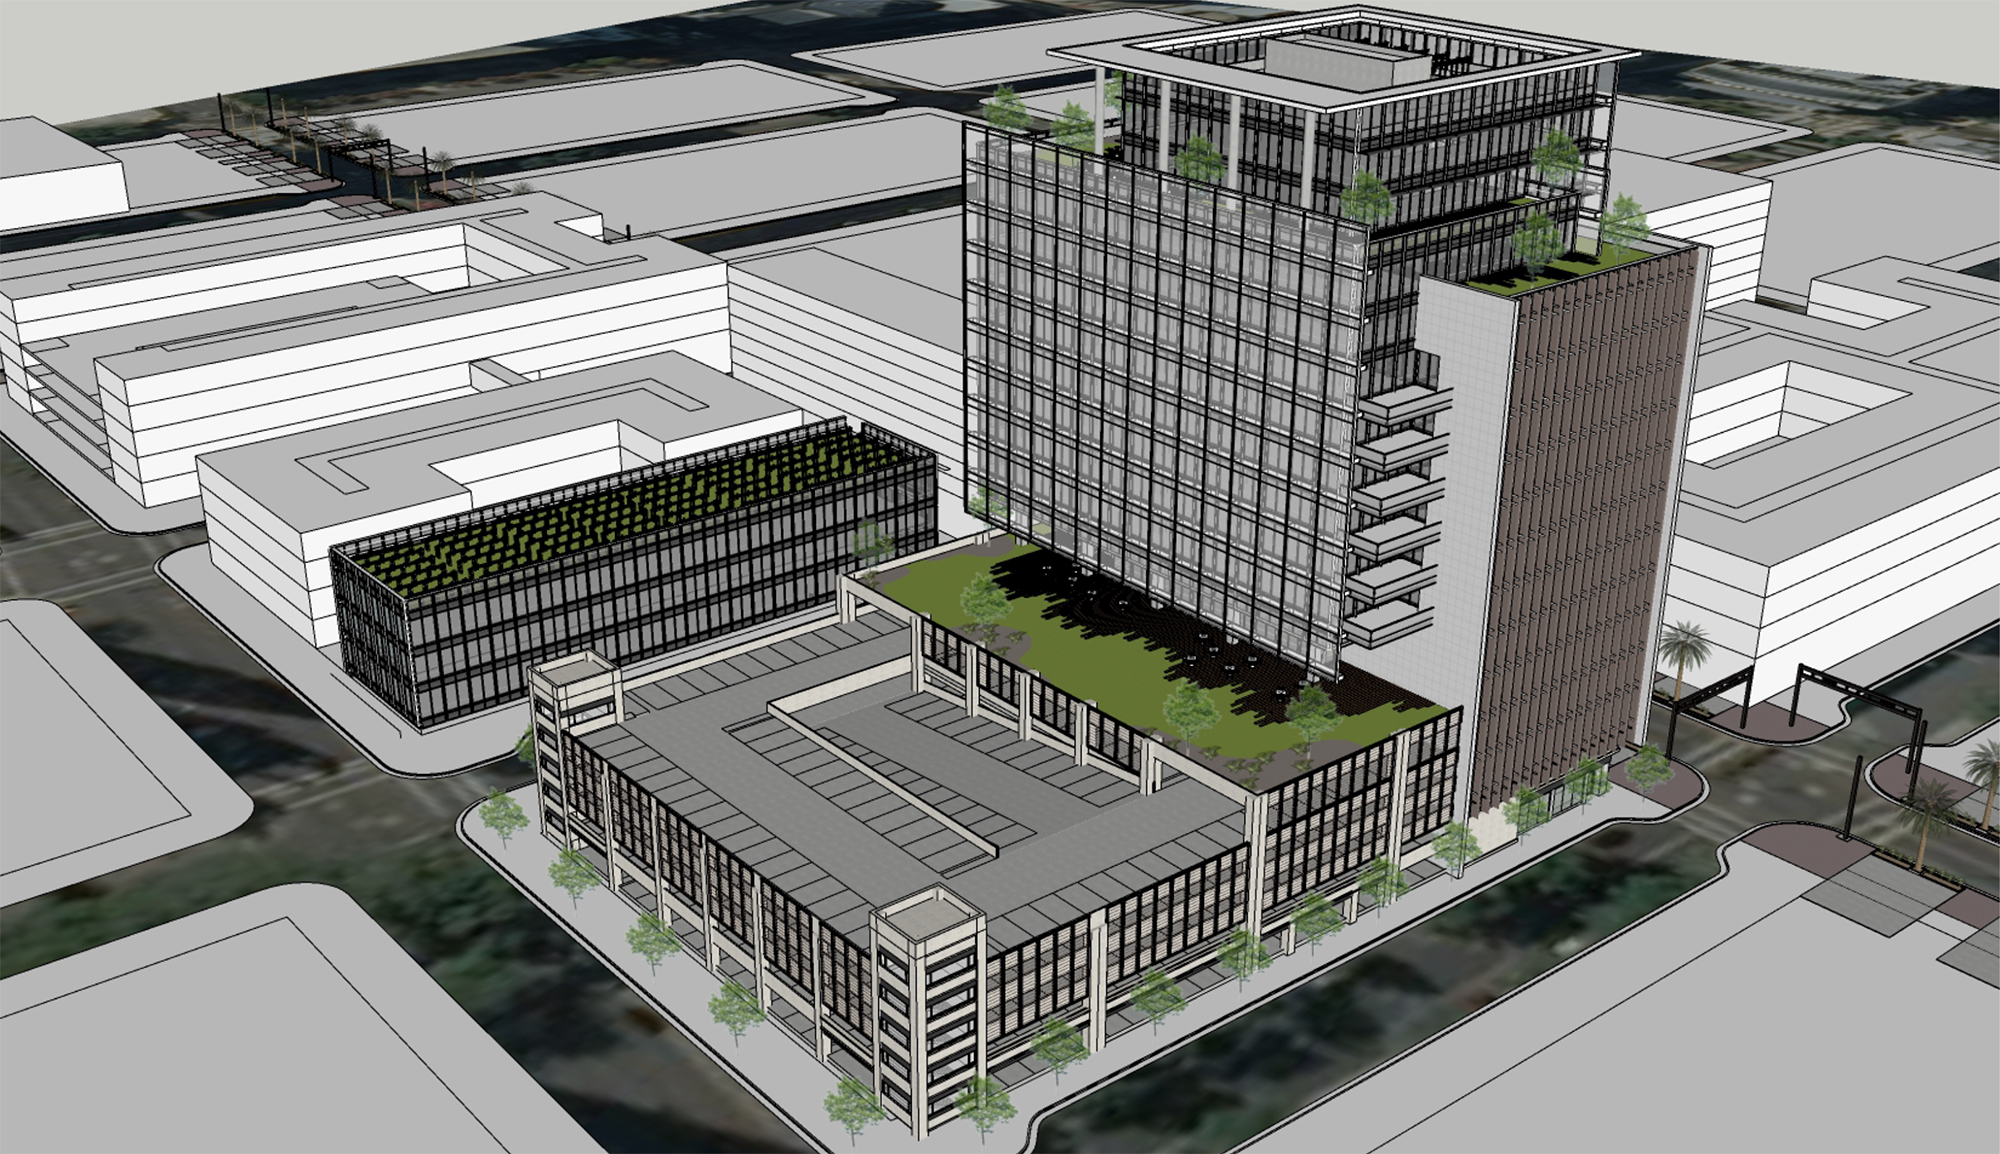 SouthEast Development Group’s conceptual plans for an “Energy Innovation District” in Downtown Jacksonville would include a new headquarters for the city-owned utility JEA.